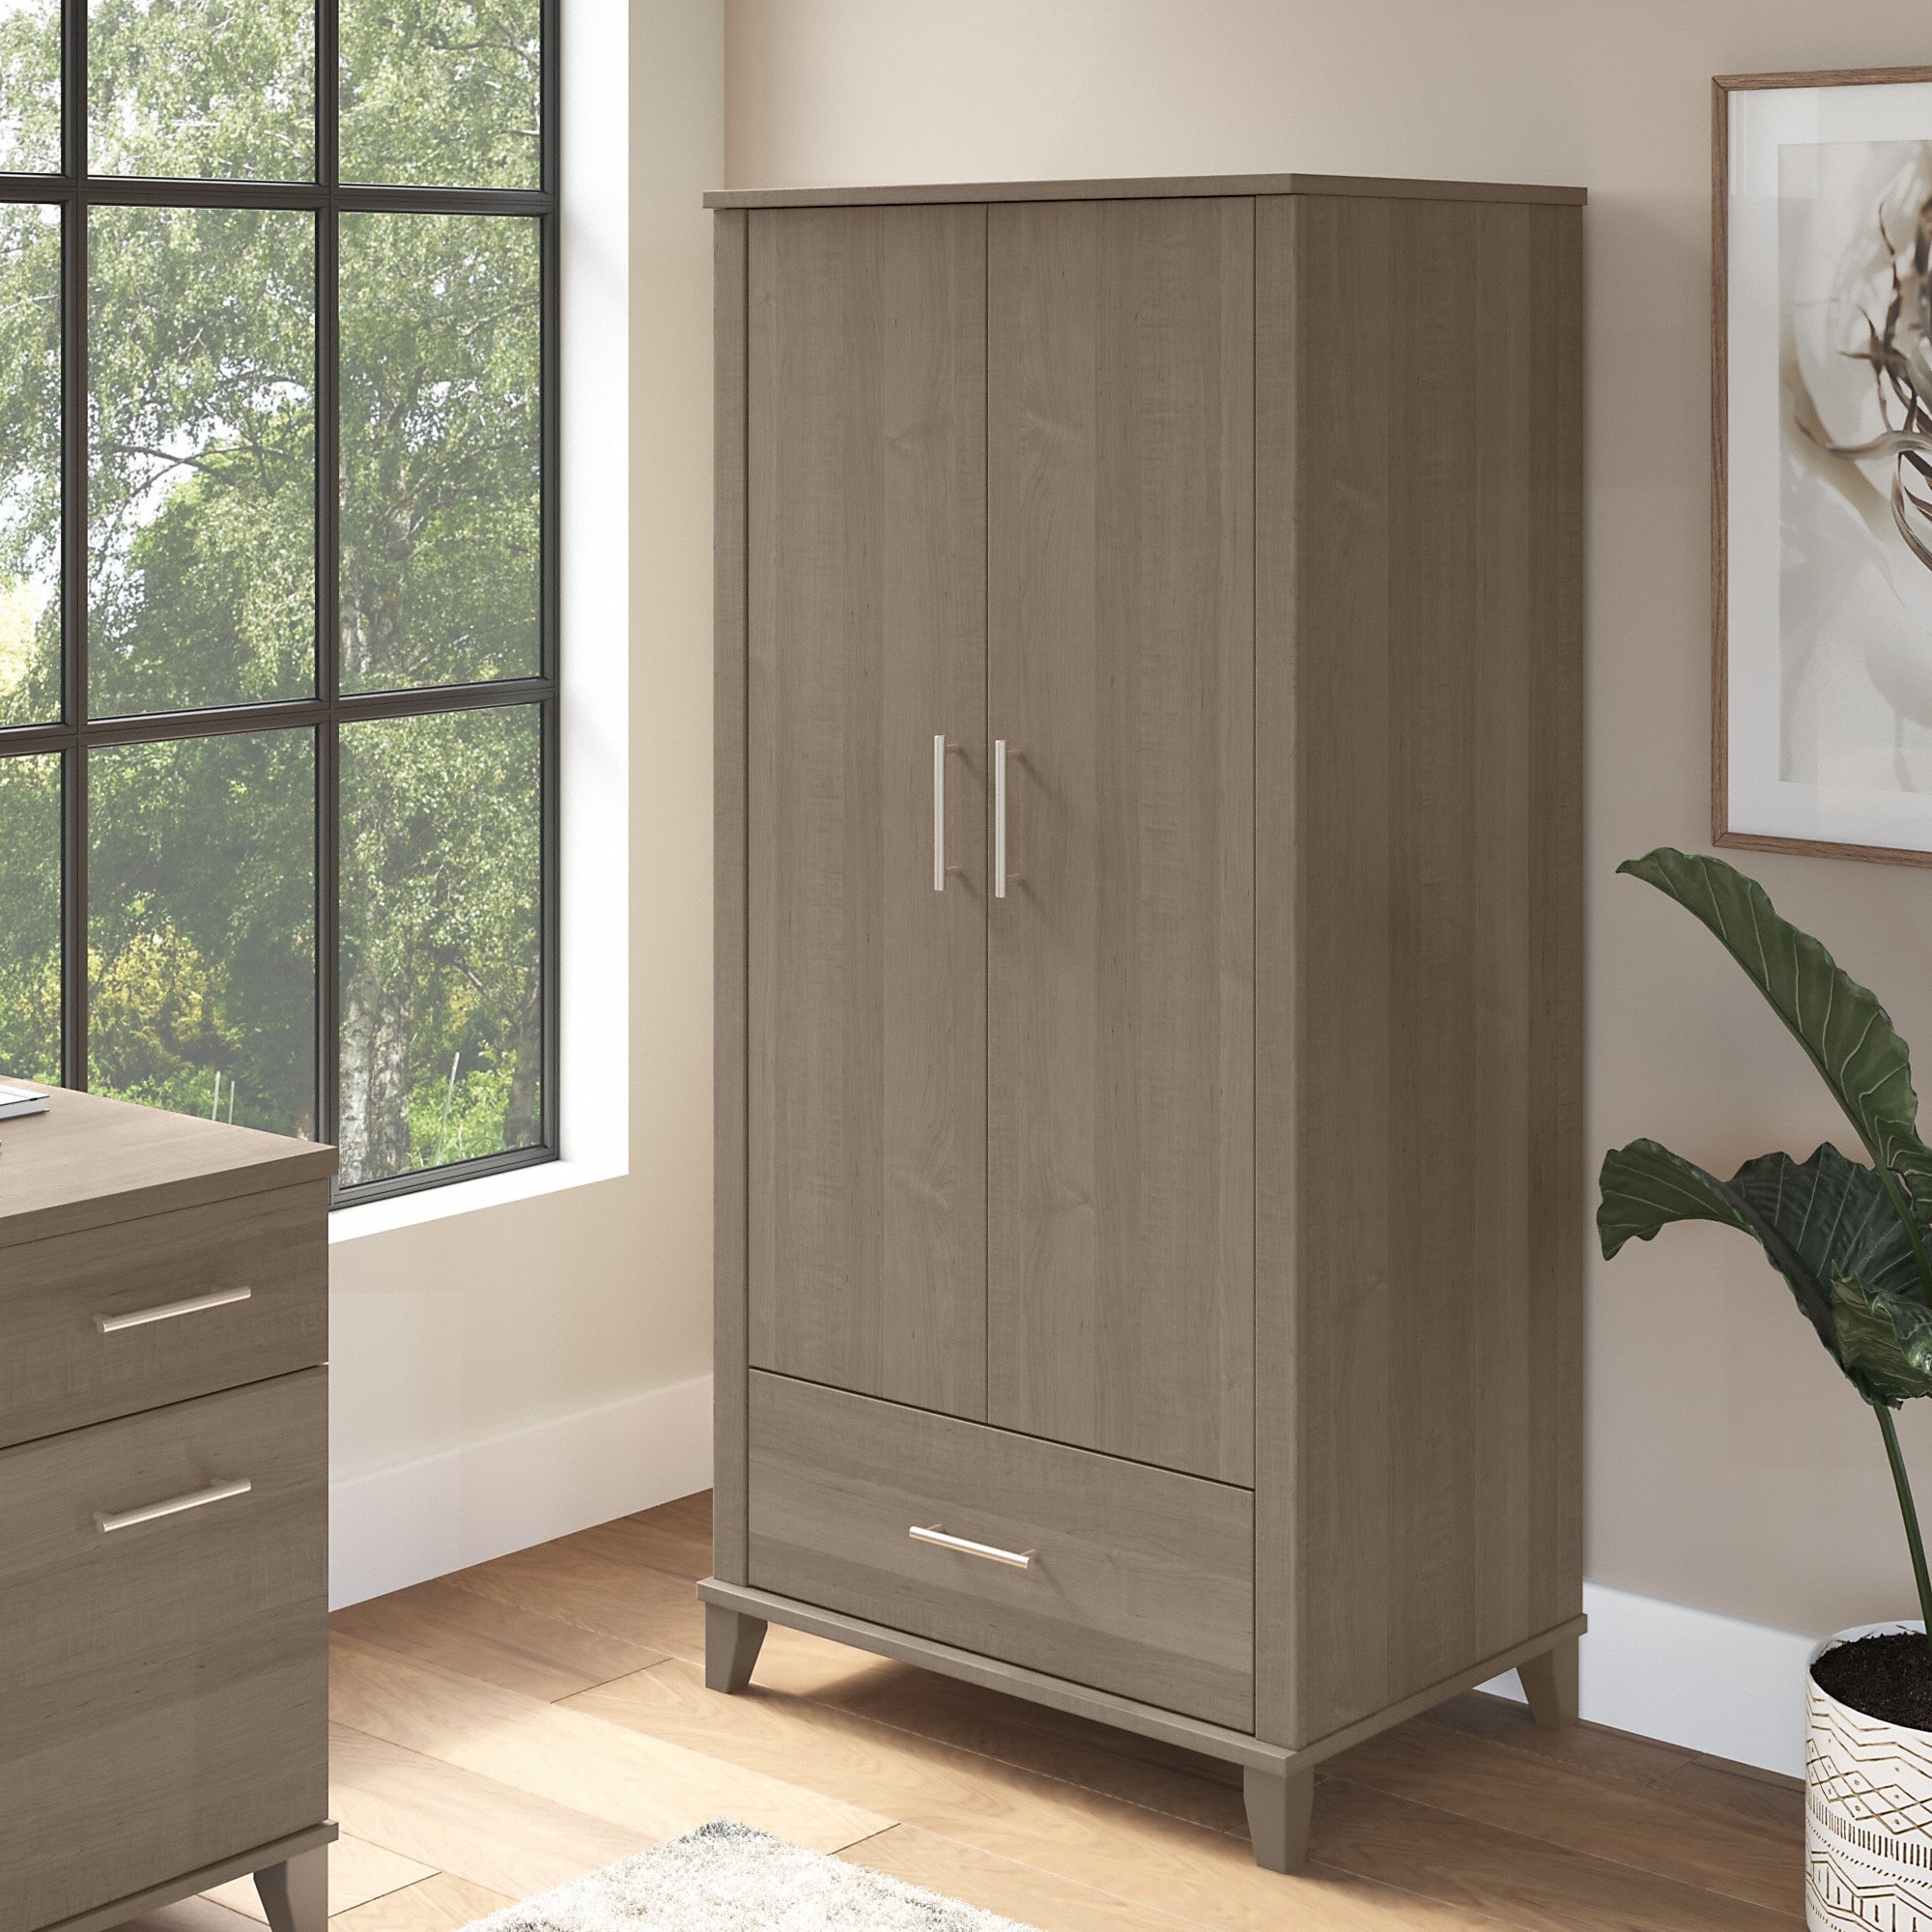 https://ak1.ostkcdn.com/images/products/is/images/direct/ef6f33efd1ade6199d7f05a4b0c5cbd9a9cca7fc/Somerset-Tall-Storage-Cabinet-with-Doors-and-Drawer-by-Bush-Furniture.jpg